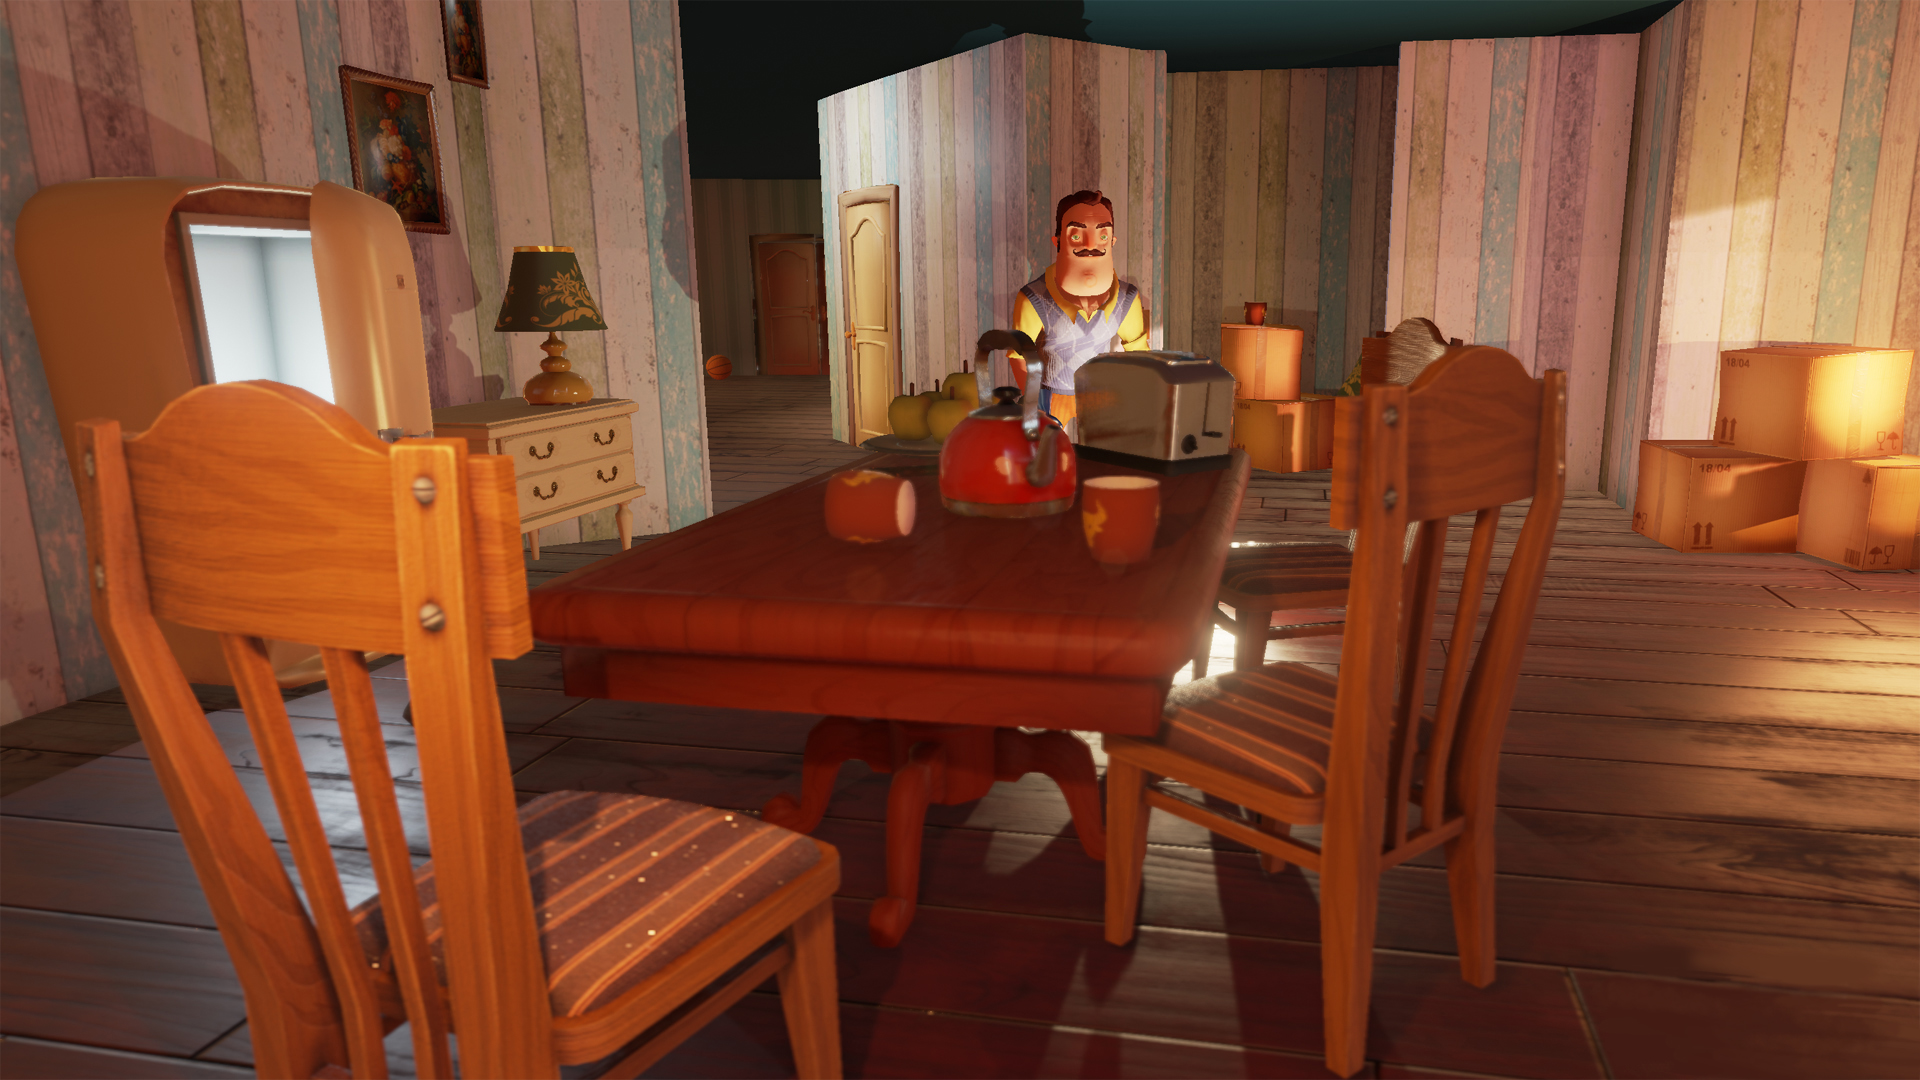 Hello Neighbor is out now on Steam